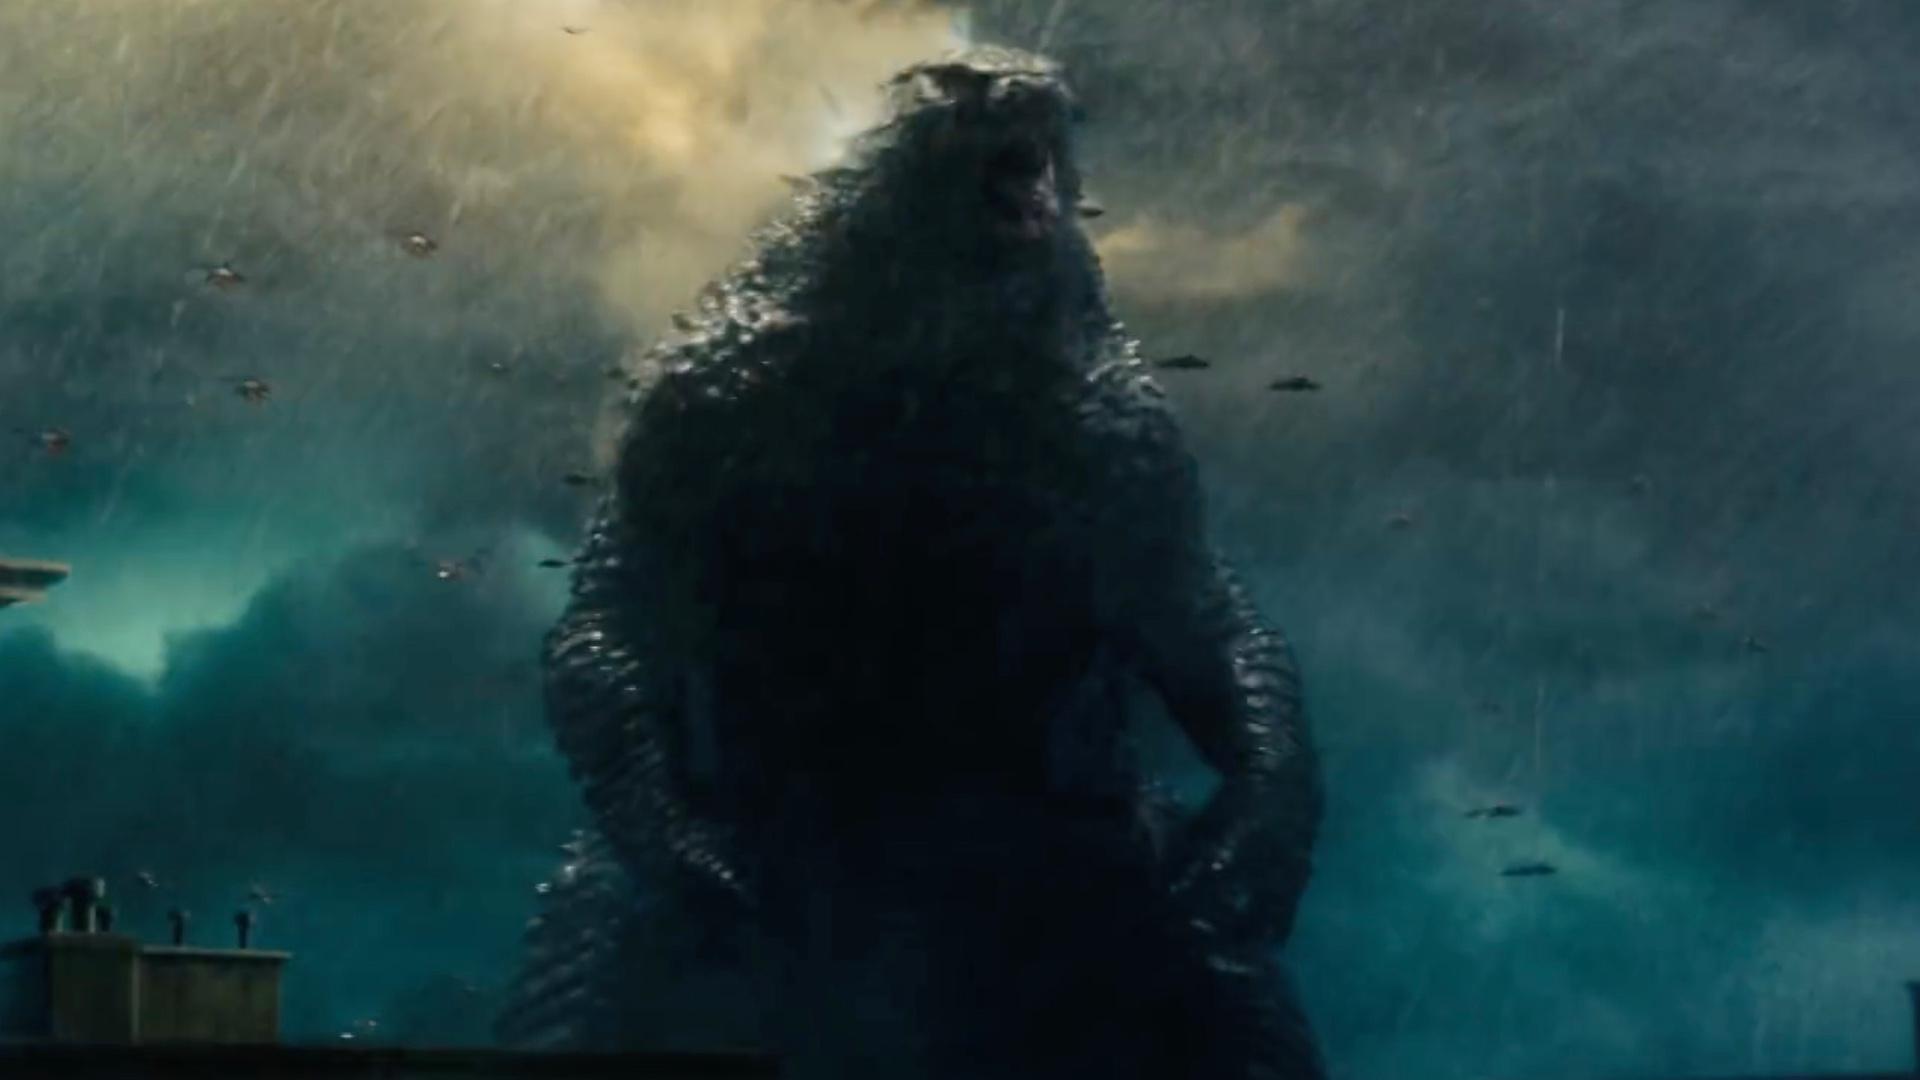 A Japanese Has Been Released for GODZILLA: KING OF THE